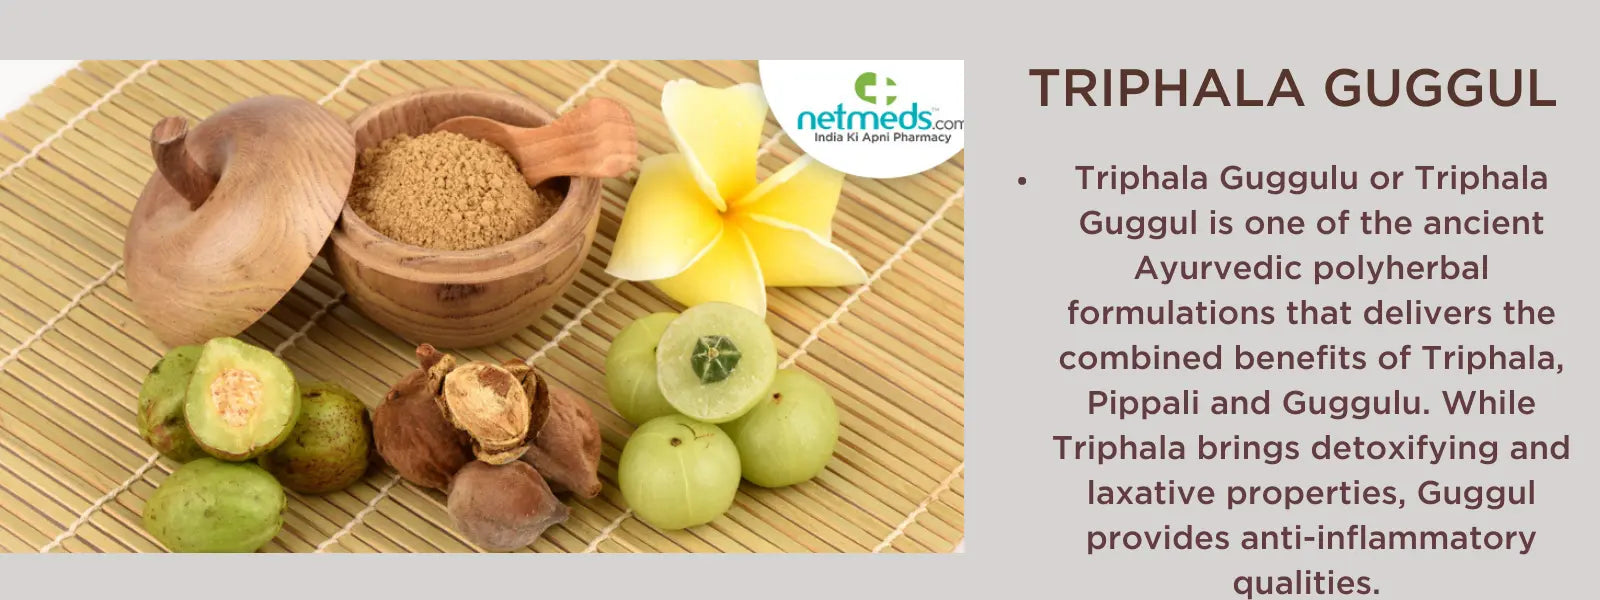 Triphala Guggulu - Health Benefits, Uses and Important Facts